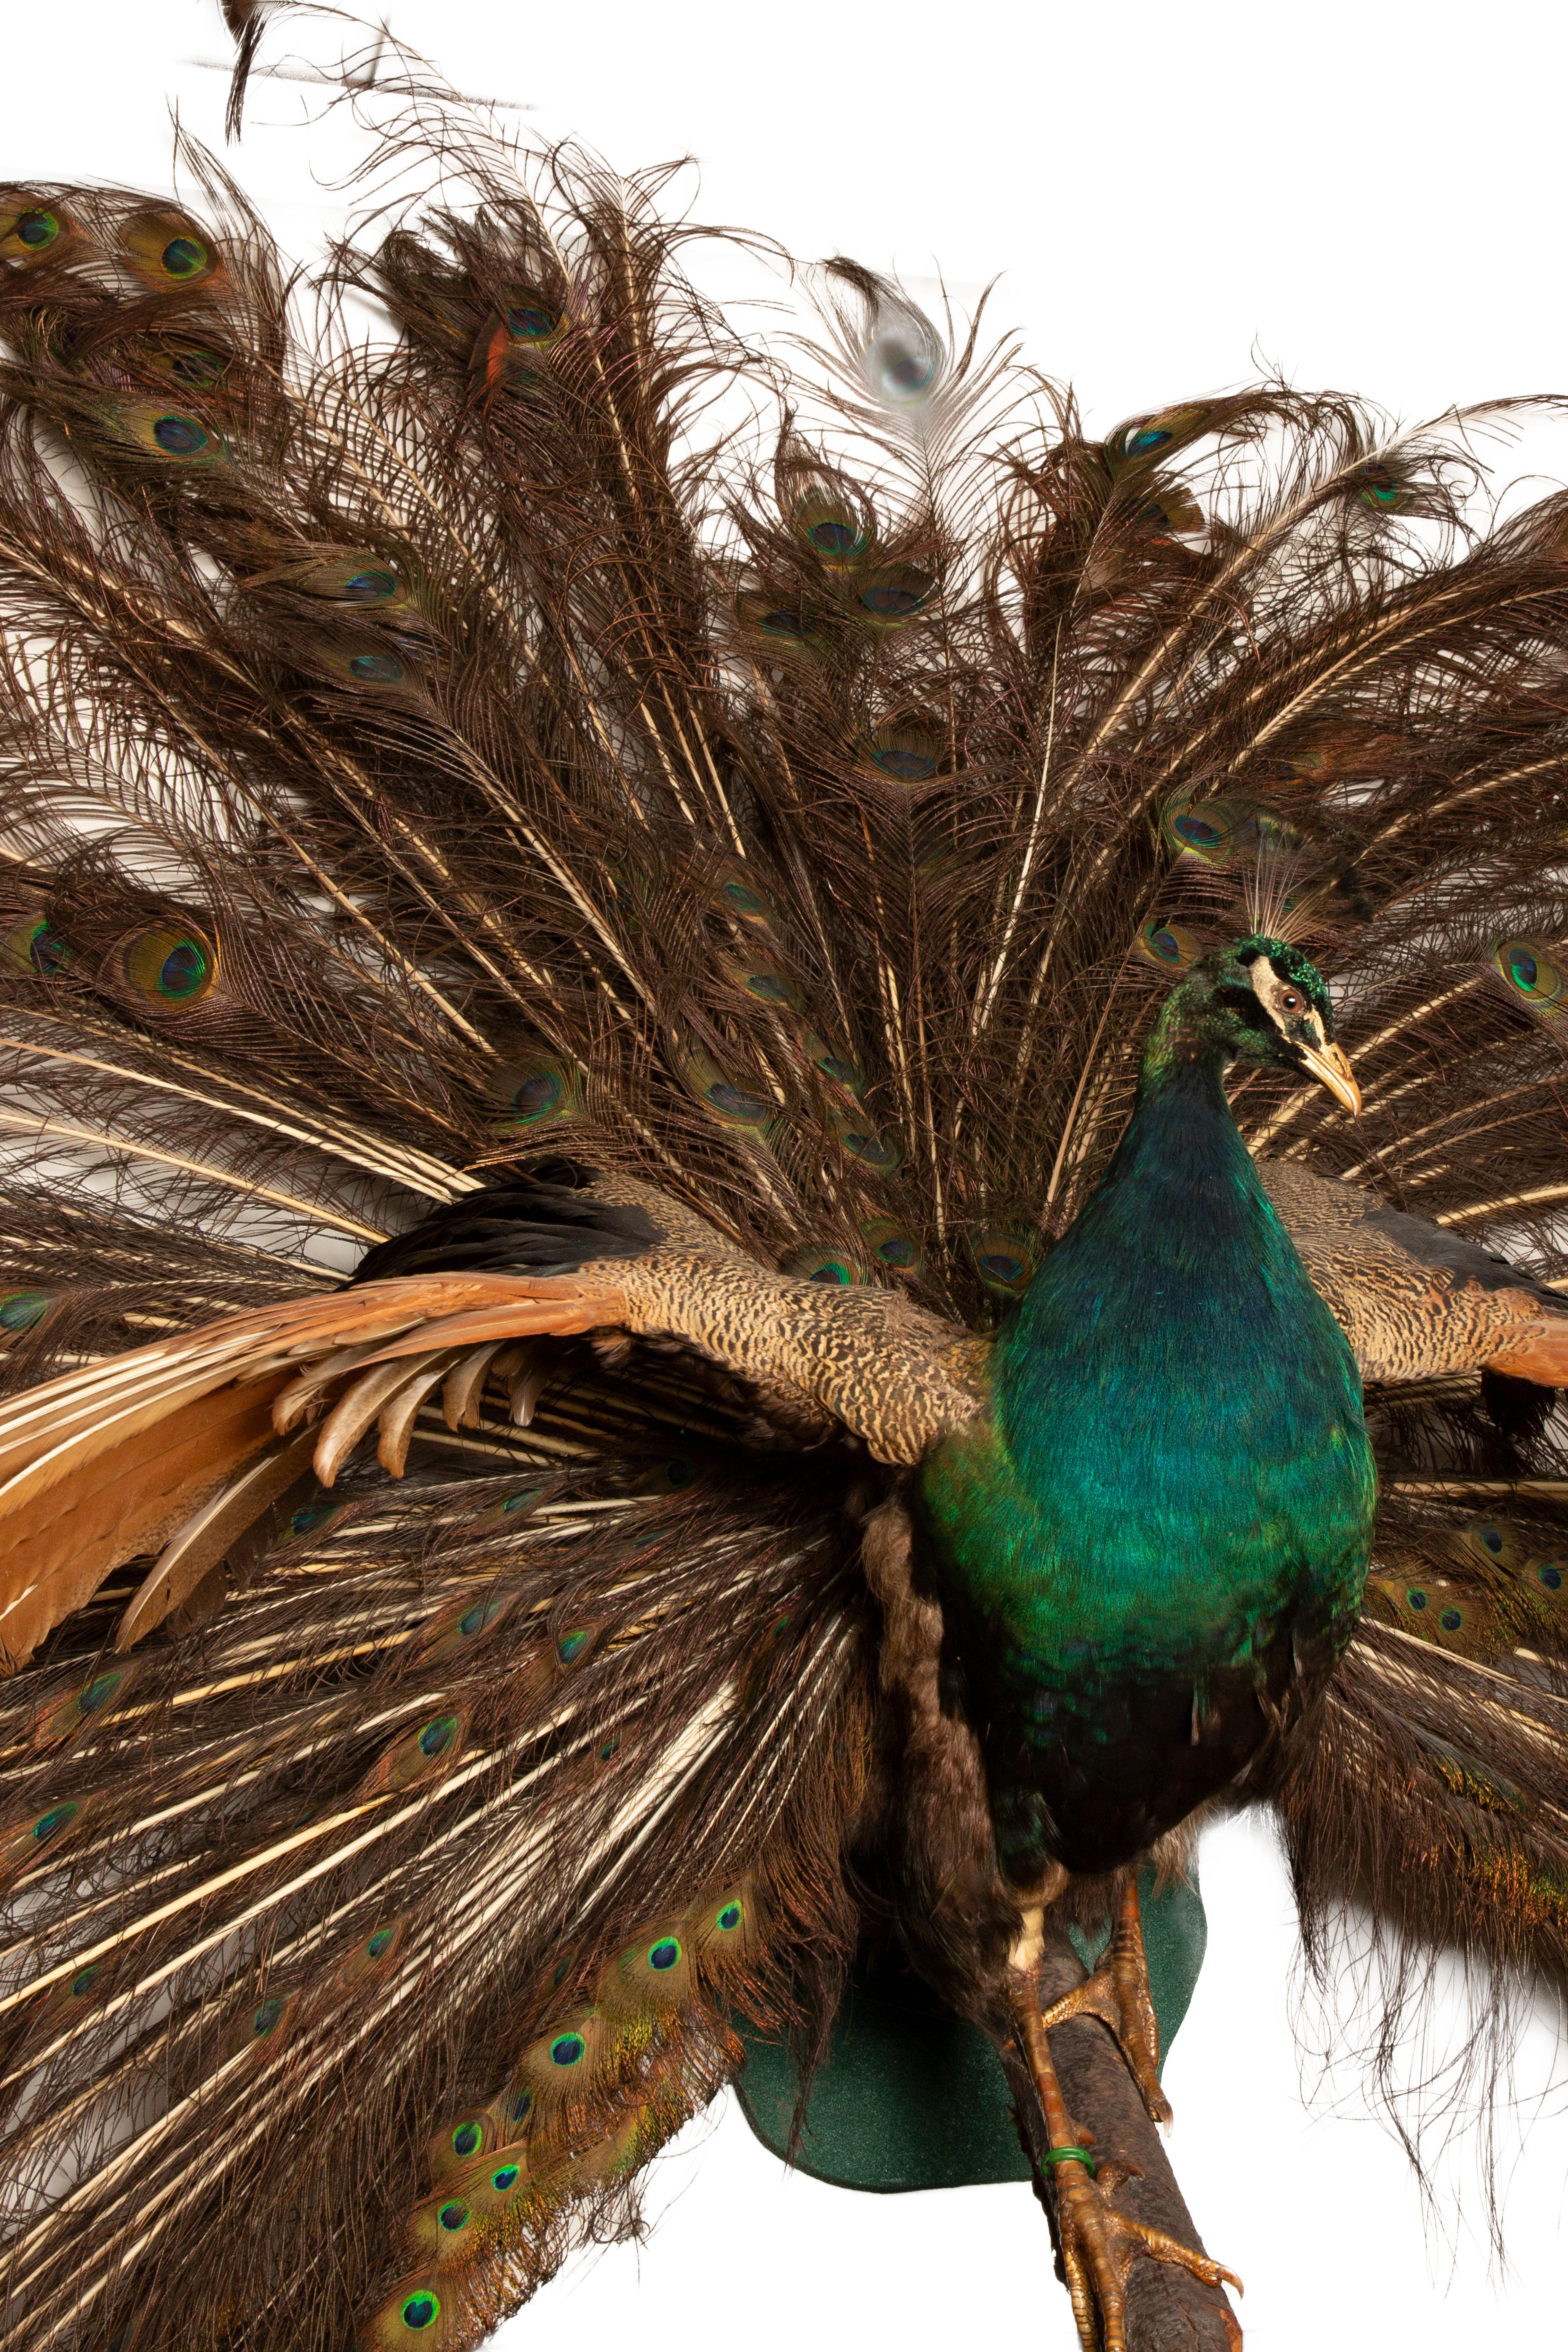 American Exquisite Wall-Mounted Indian Blue Peacock Taxidermy: Feathers in Full Splendor For Sale